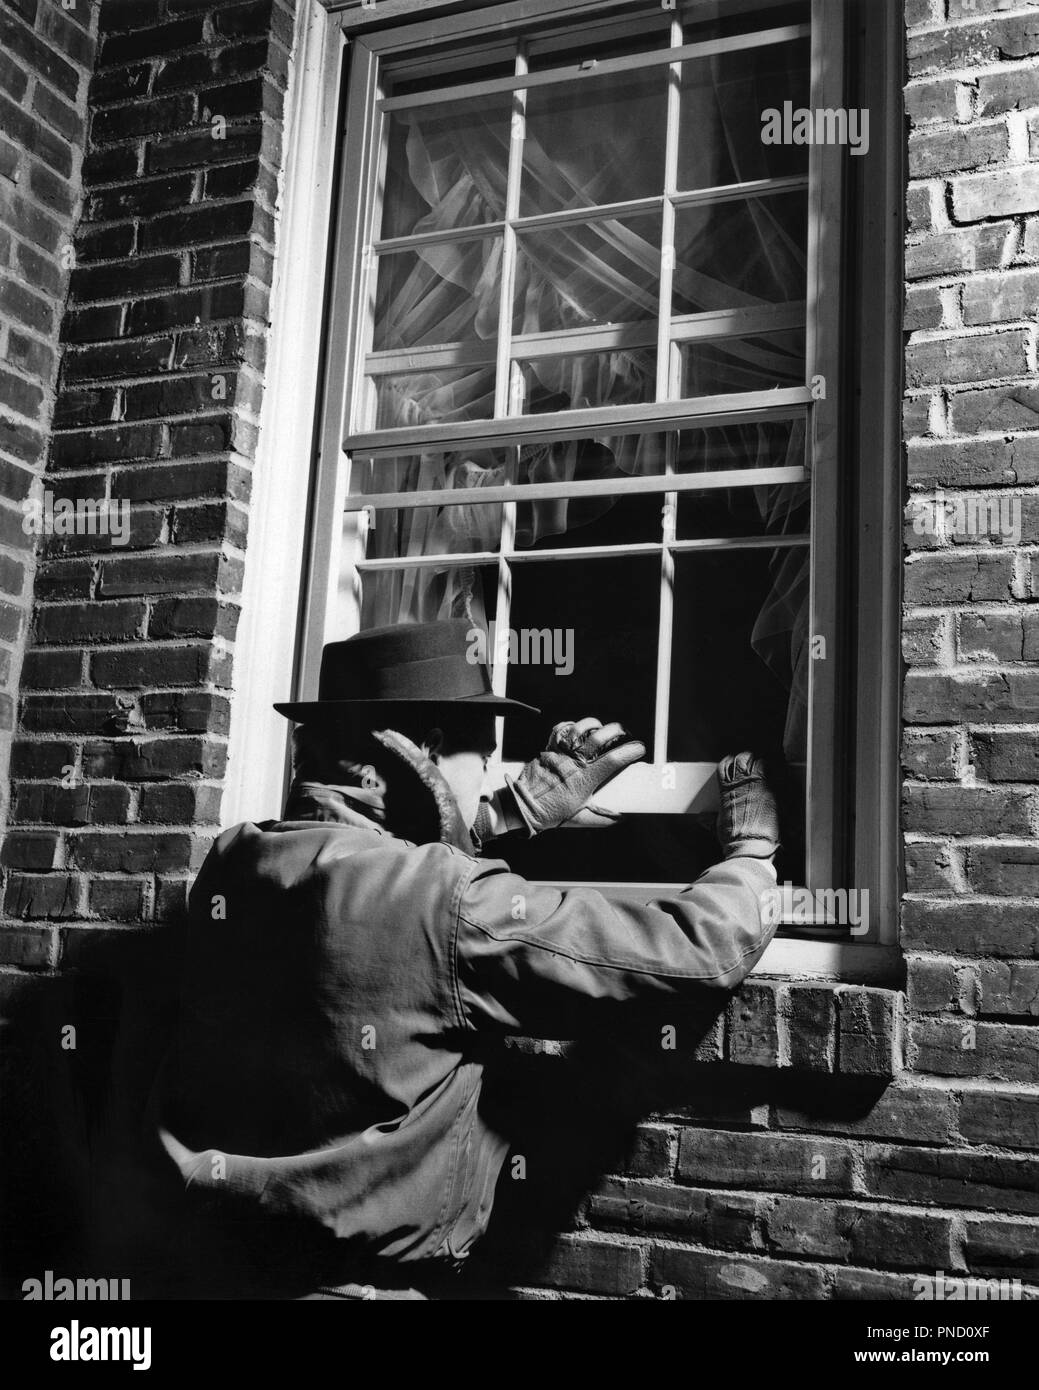 1950s THIEF MAN WEARING HAT GLOVES JACKET BREAKING INTO BRICK HOUSE OPENING  WINDOW NIGHTTIME - c6207 HAR001 HARS MALES RISK ROBBER STEALING B&W WINDOWS THIEF  ROBBERY DISASTER PROTECTION EXTERIOR LOW ANGLE OPPORTUNITY